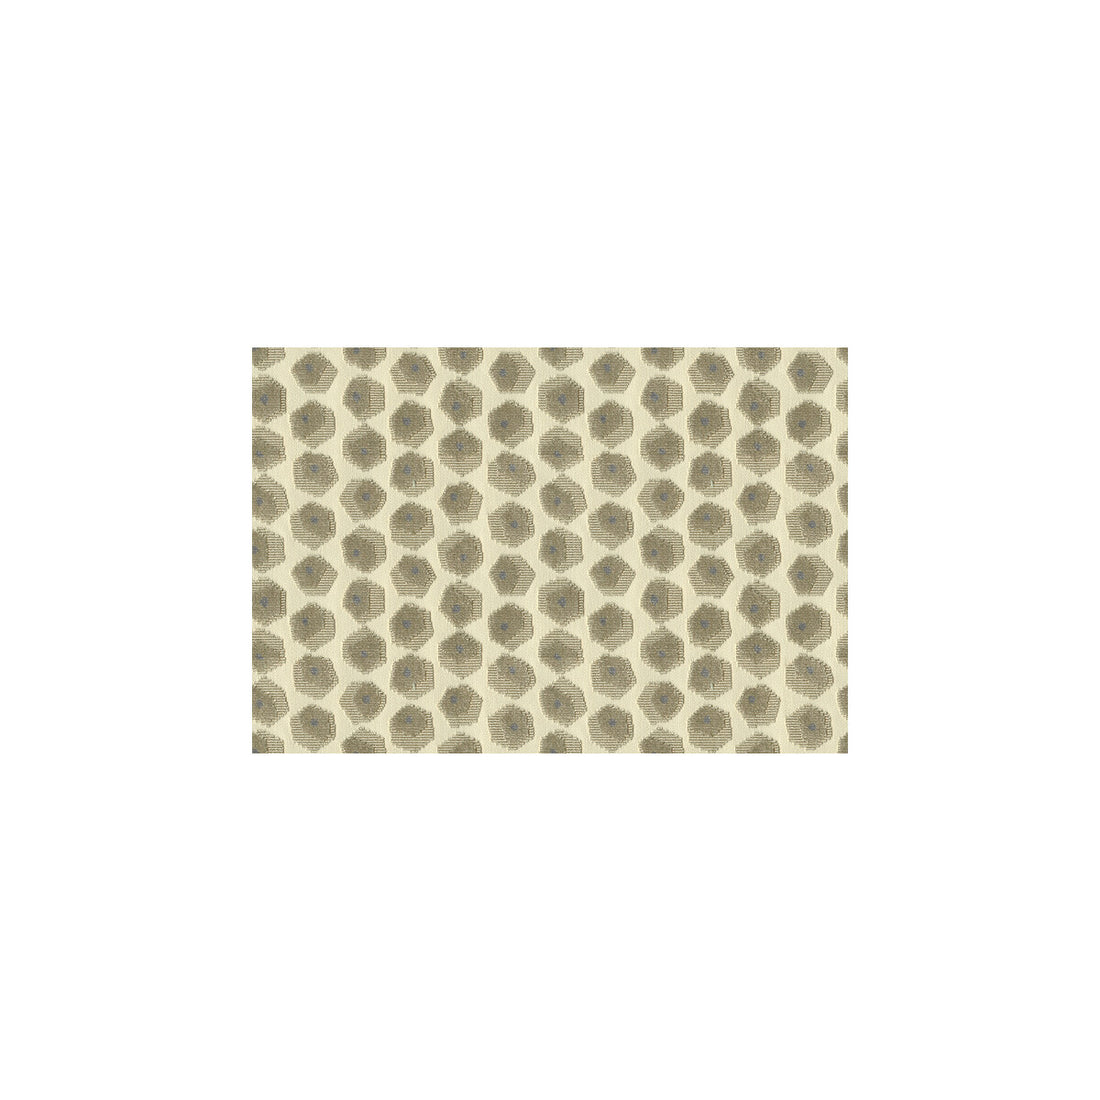 Gem Velvet fabric in beige color - pattern GWF-3036.16.0 - by Lee Jofa Modern in the Ventana Weaves collection